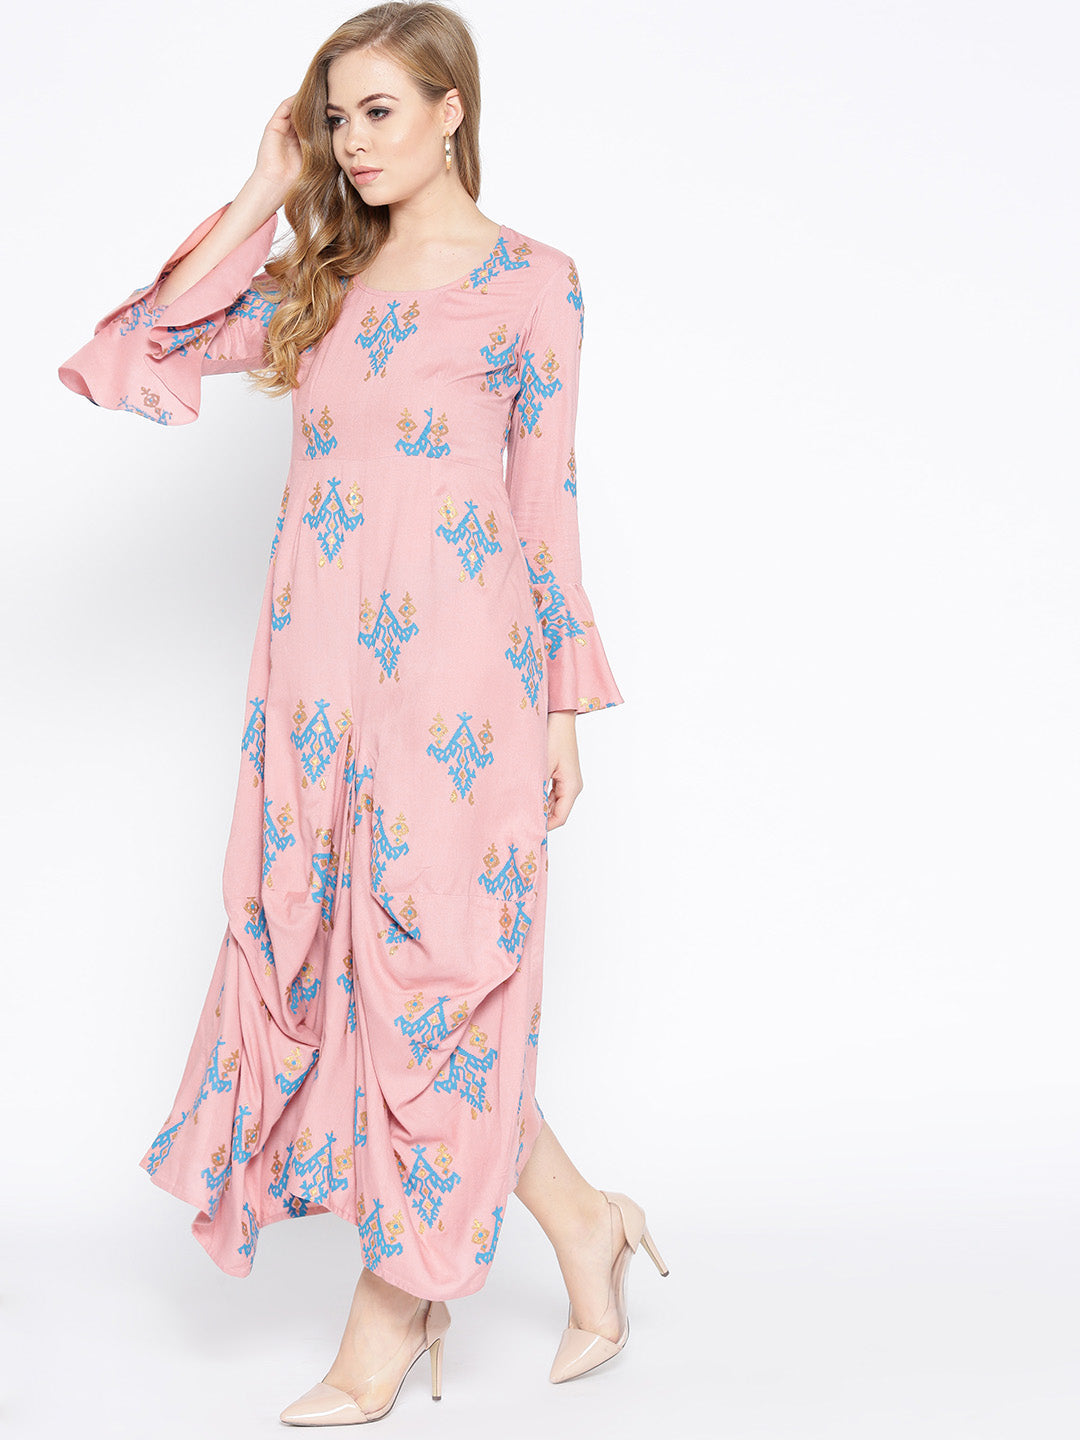 Bell Sleeve ikat print Long dress with front drape in Dusty Pink